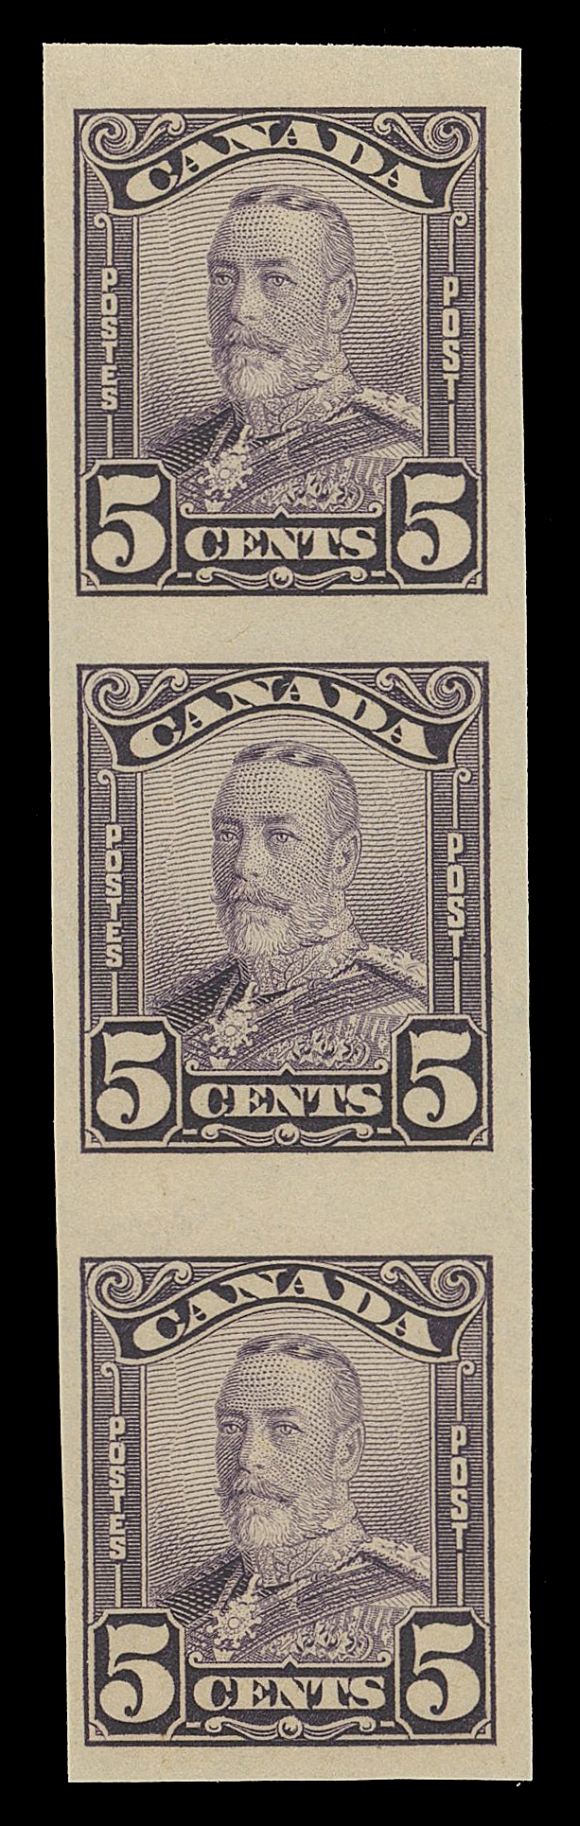 CANADA -  8 KING GEORGE V  149, 150b, 153b variety,The set of three mint imperforate vertical strips of three, each with horizontal (4.5mm wide) gutter between lower pair; originating from the imperforate "tête-bêche" booklet pane sheets, VF NH